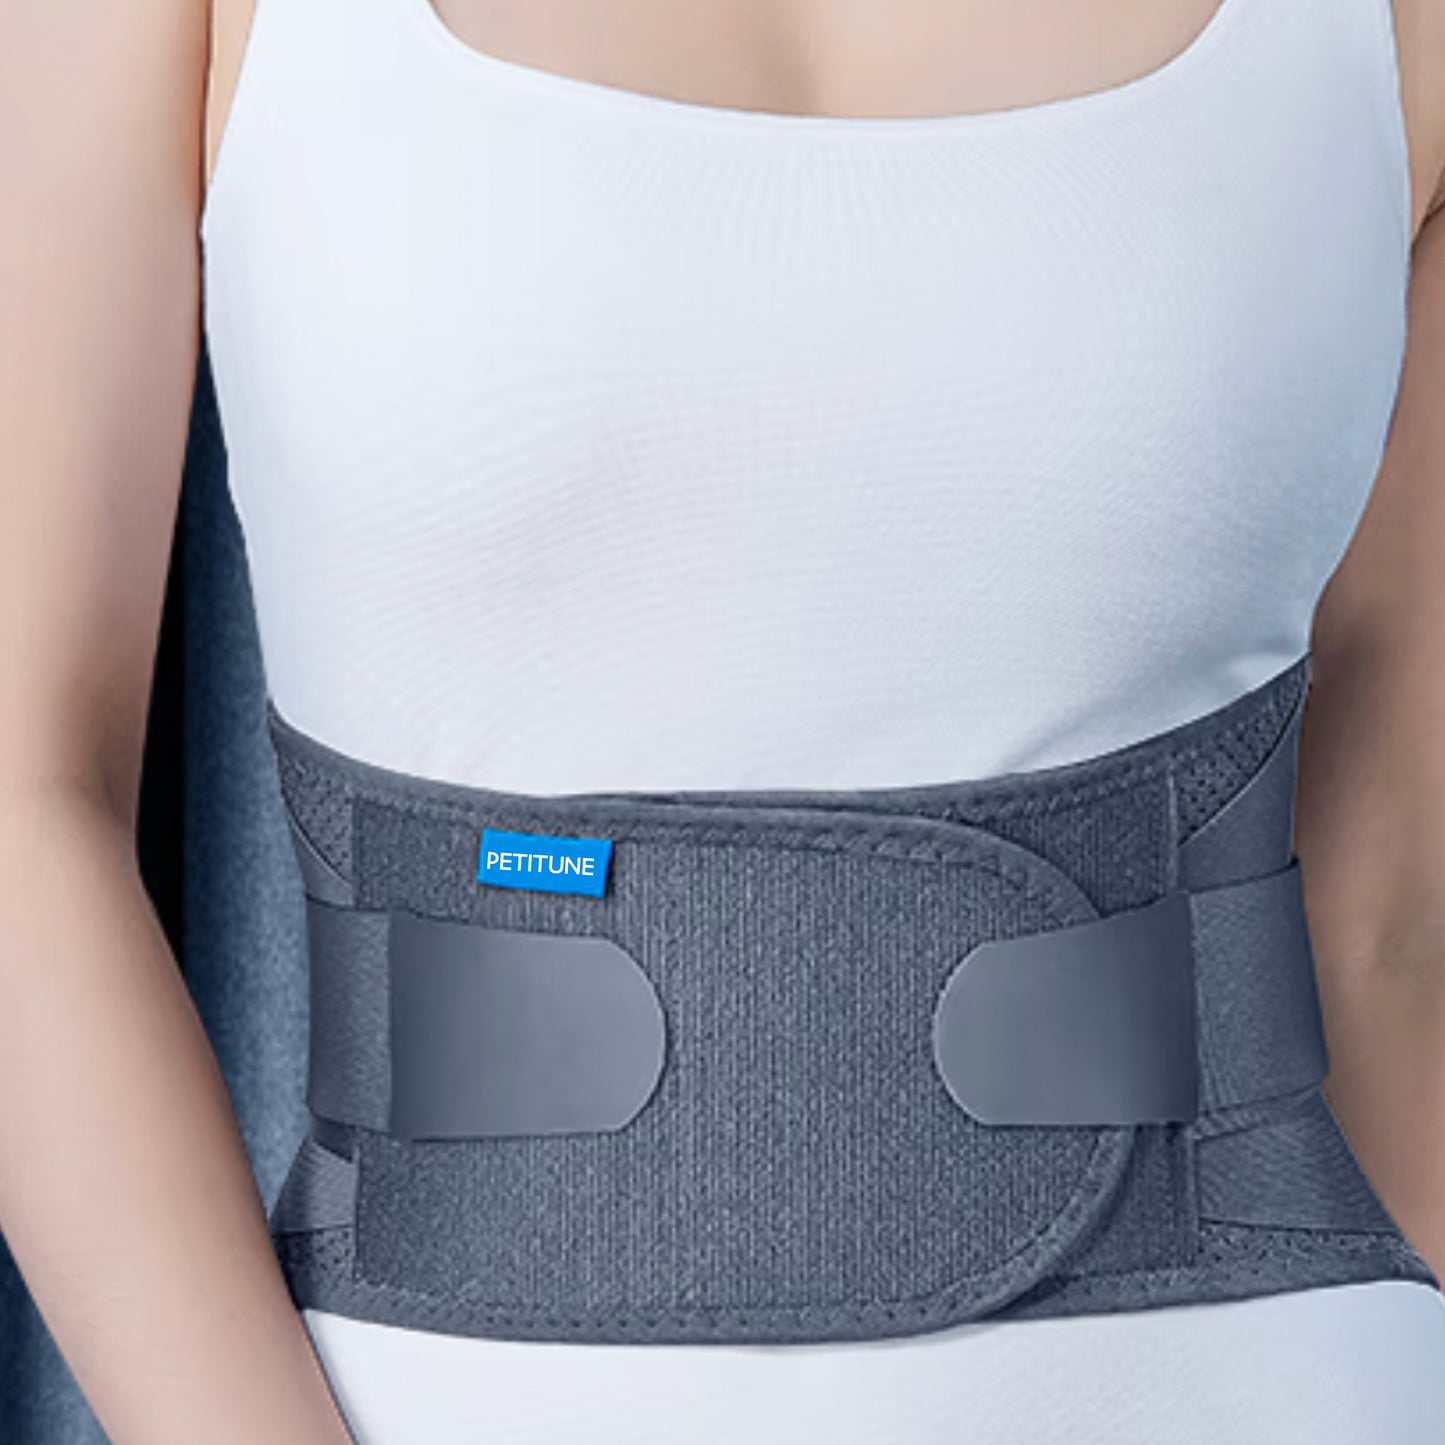 PETITUNE Maternity Support Belts for Medical Purposes